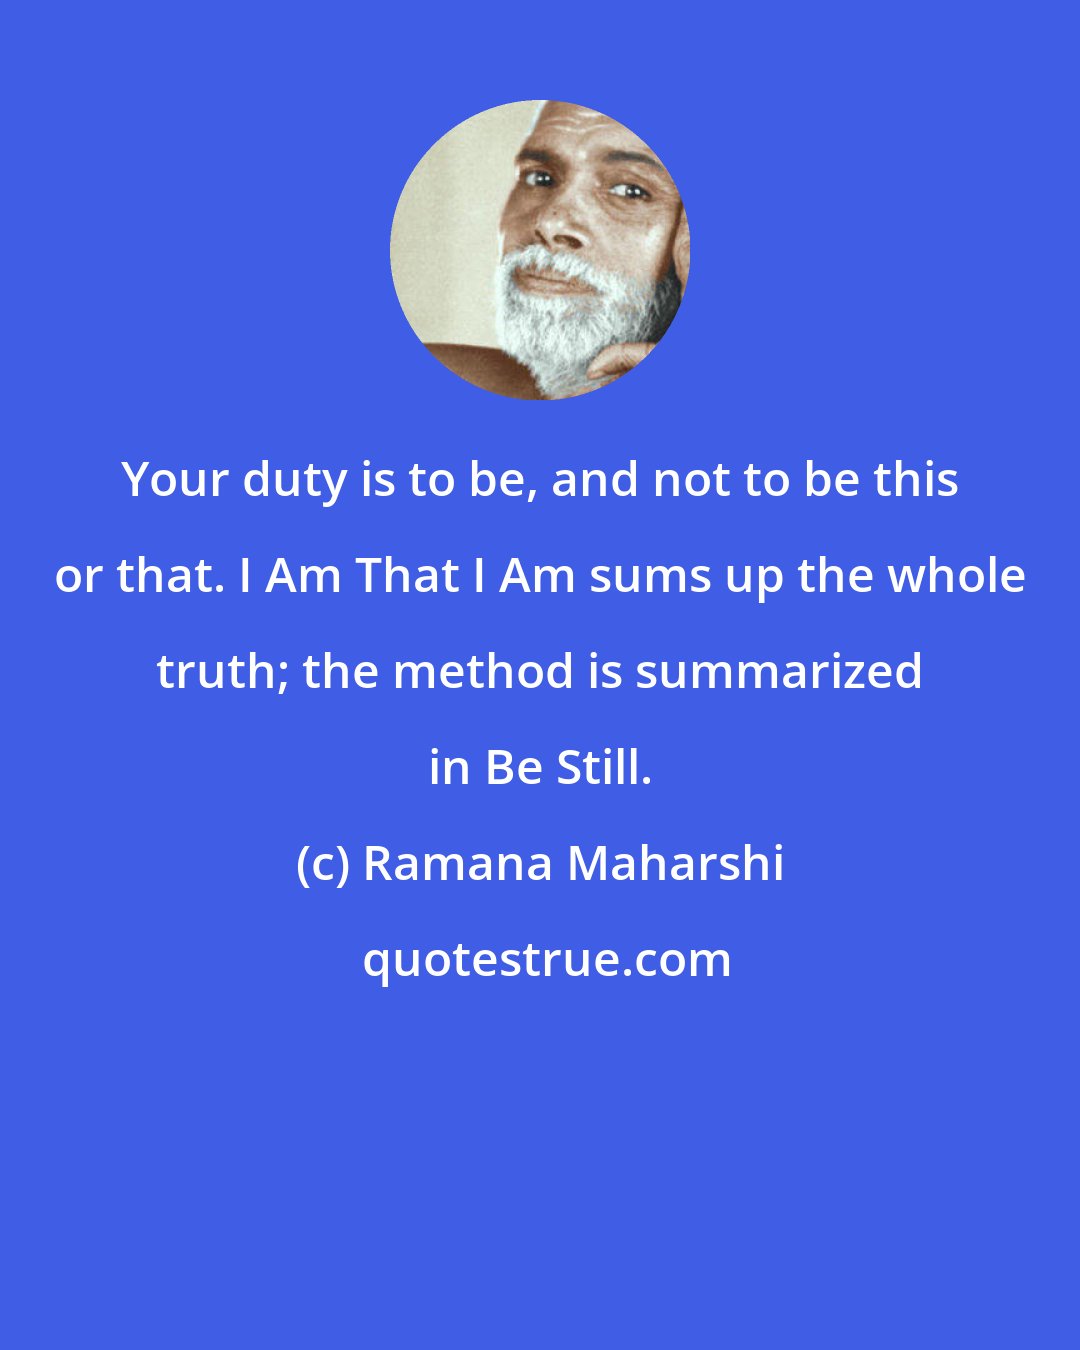 Ramana Maharshi: Your duty is to be, and not to be this or that. I Am That I Am sums up the whole truth; the method is summarized in Be Still.